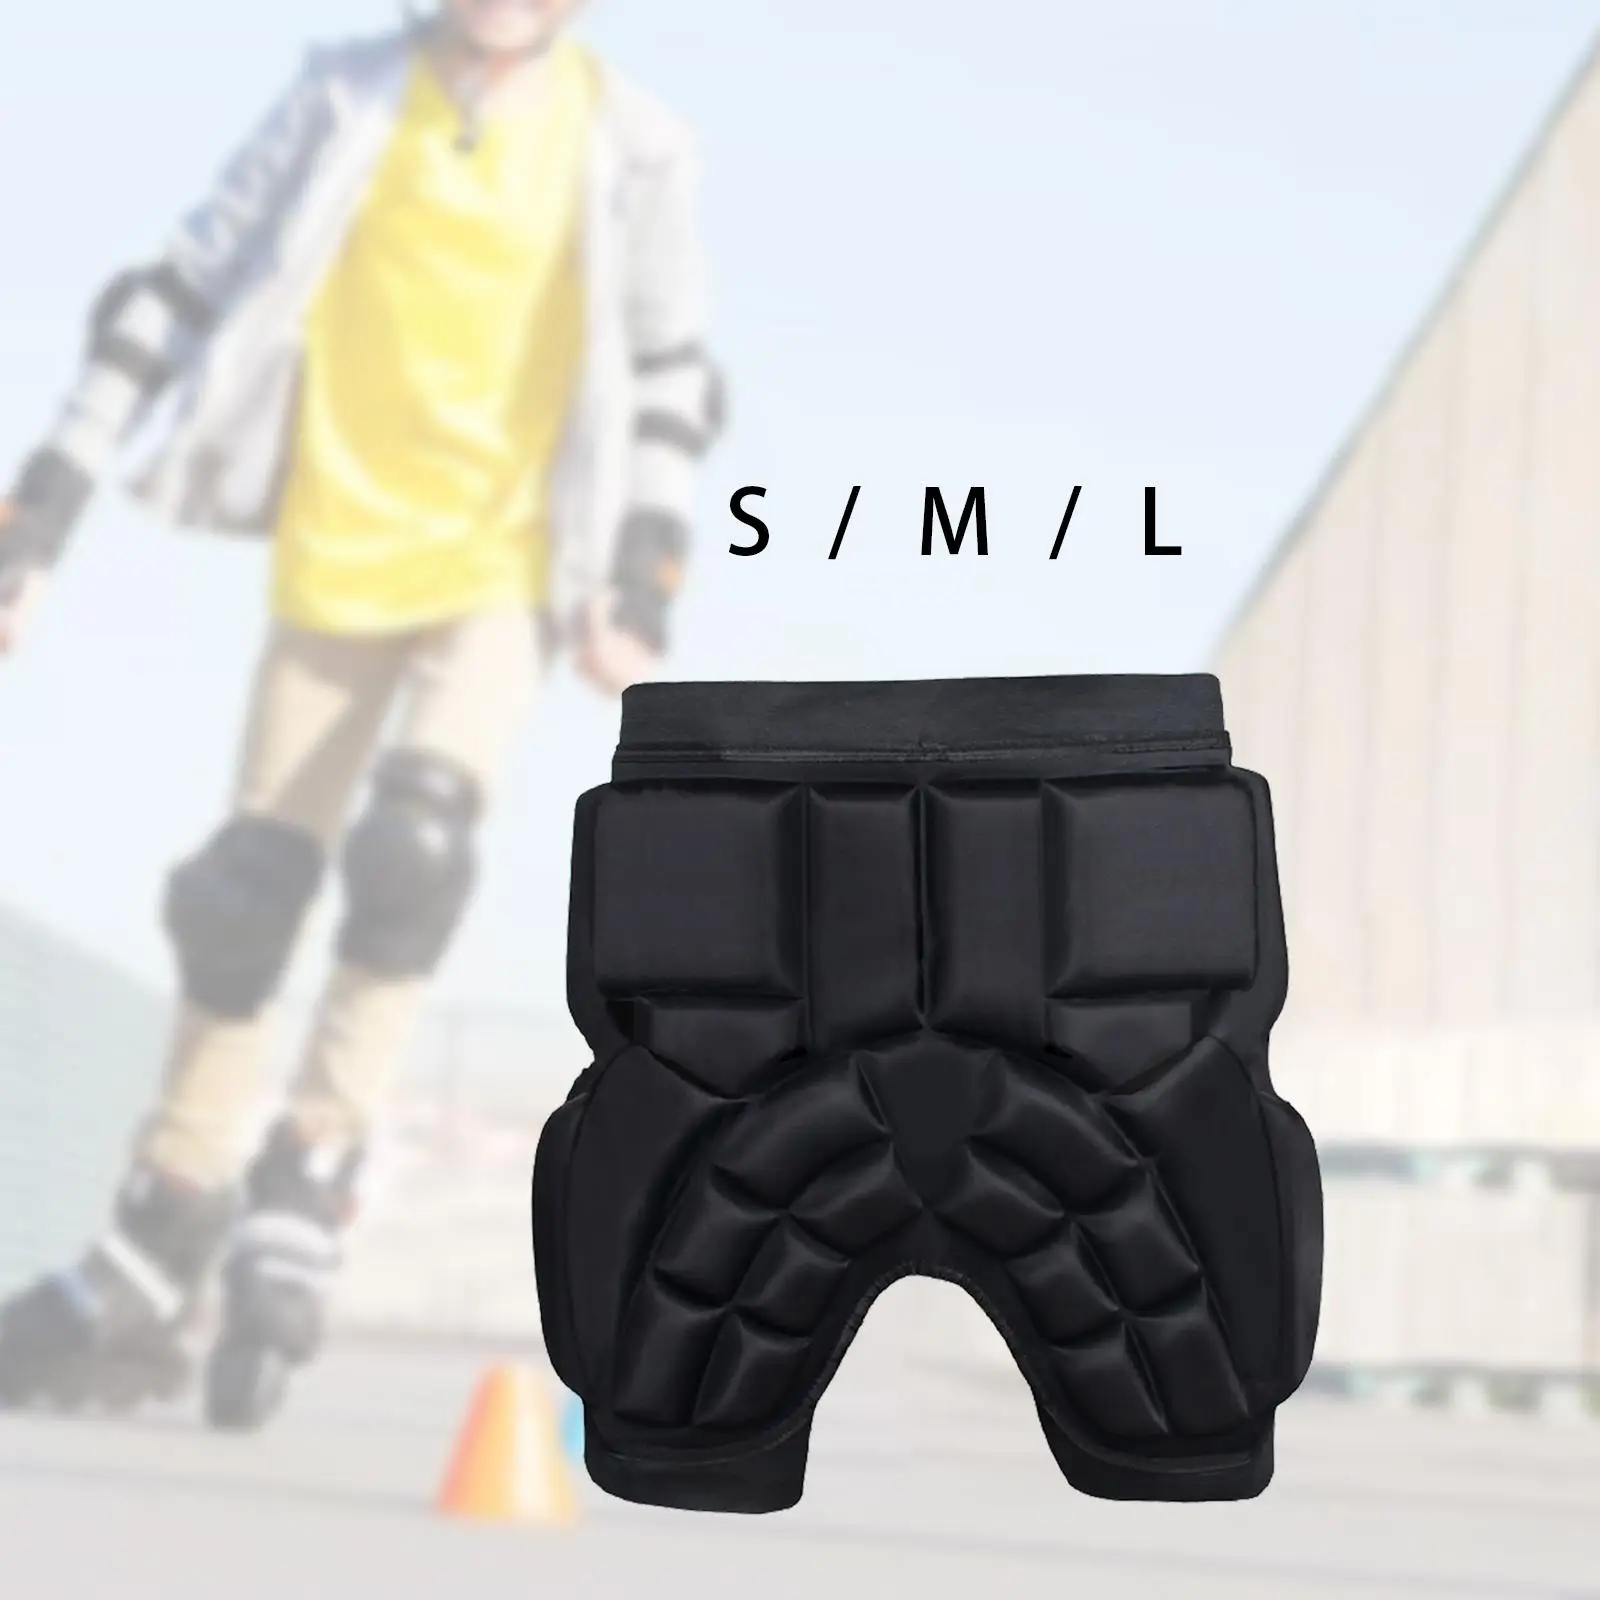 Hip Guard Pad 3D Supporter Mat Shockproof Protector Support Gear Impact Protection for Skiing Snowboarding Sports Scooter Biking